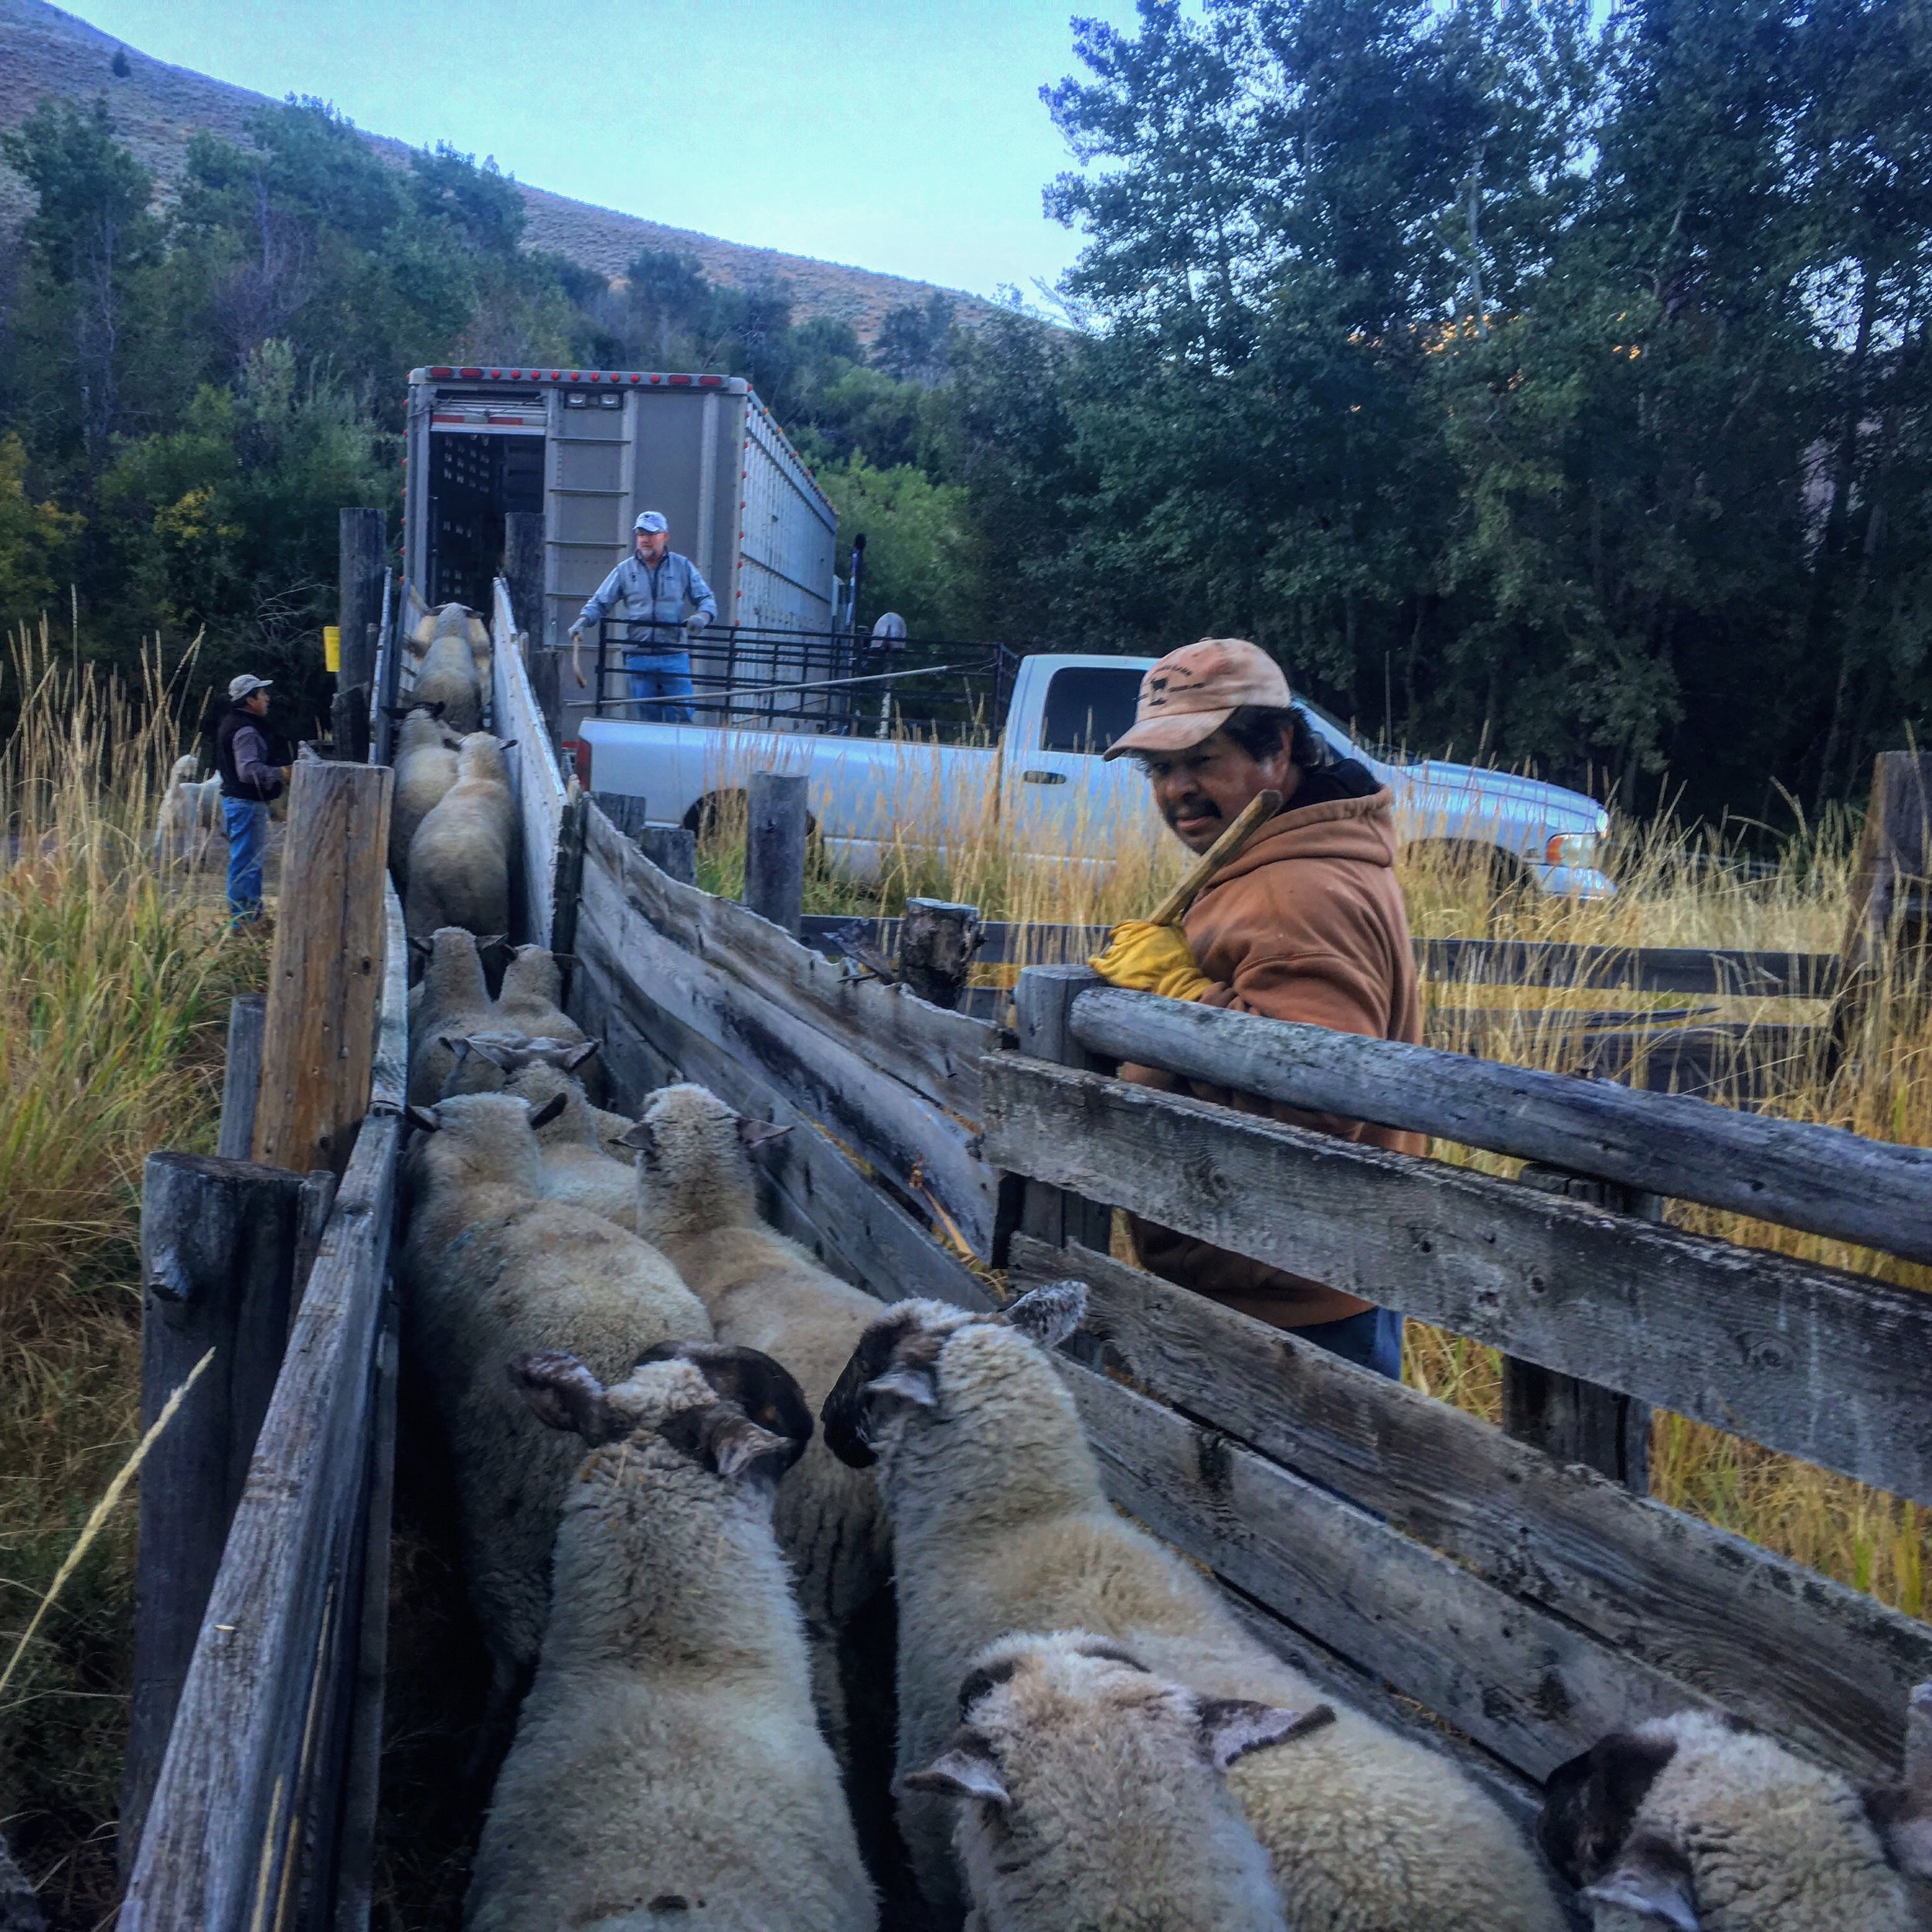  Fall 2016 - Helping with shipping for Lava Lake Lamb in Fish Creek of the foothills of the Pioneer Mountains near Carey, Idaho. 